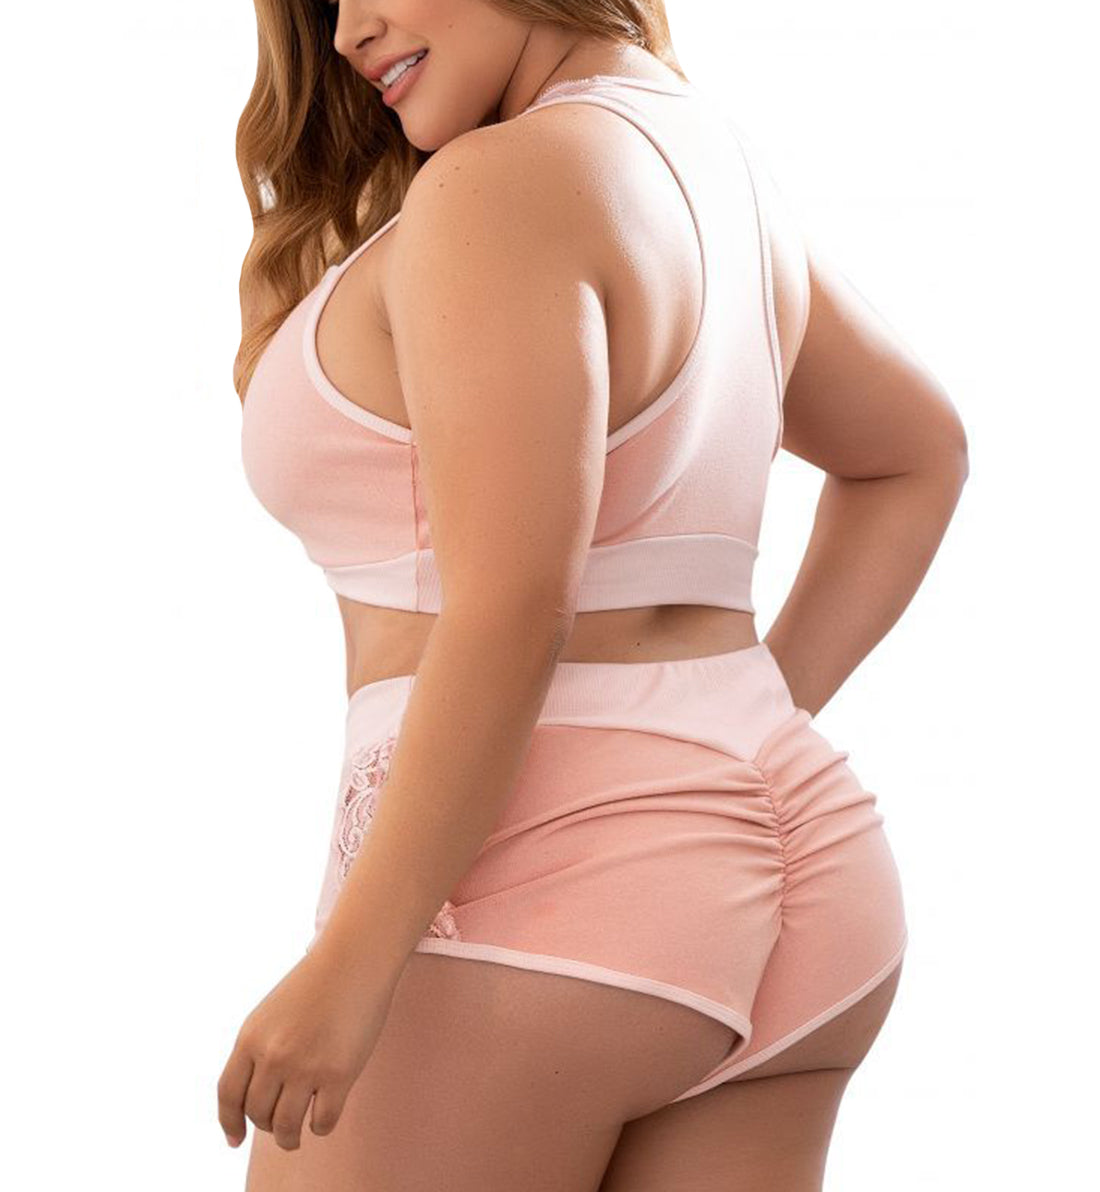 Mapale Racer Crop Top & Cheeky Short PLUS size (7389X),1X/2X,Rose - Rose,1X/2X